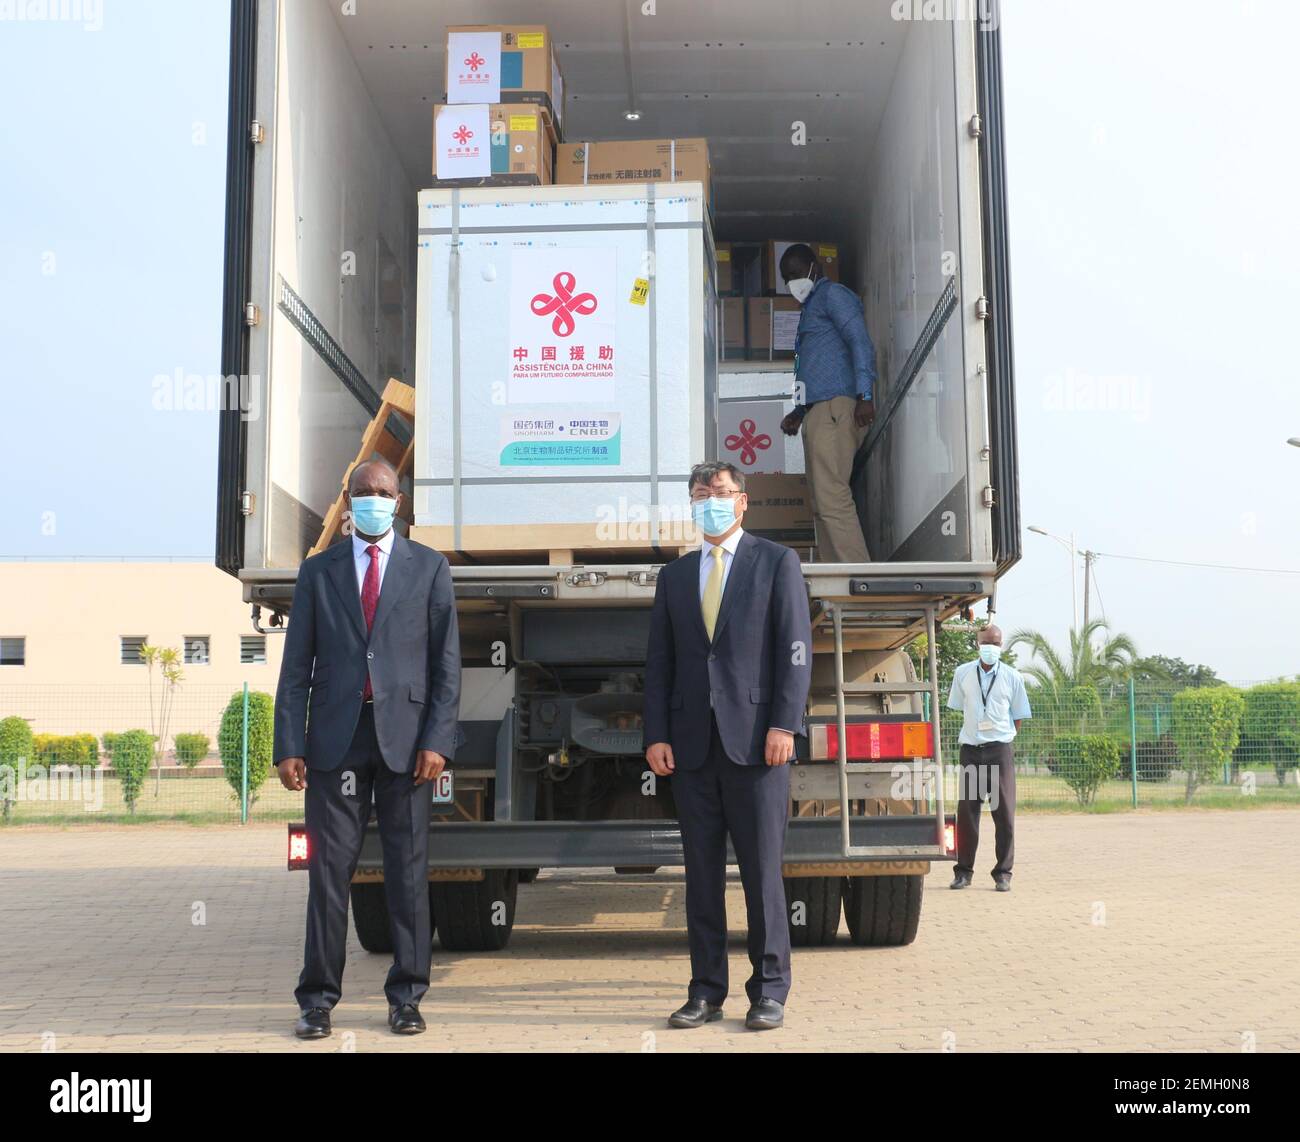 (210225) -- MAPUTO, Feb. 25, 2021 (Xinhua) -- Mozambican Prime Minister Carlos Agostinho do Rosario (L, front) and Chinese Ambassador to Mozambique Wang Hejun (R, front) stand in front of the COVID-19 vaccines donated by China at the Maputo International Airport in Maputo, Mozambique, Feb. 24, 2021. A batch of COVID-19 vaccines donated by China arrived here on Wednesday to help the African country fight against the COVID-19 pandemic, and it was also the first batch of COVID-19 vaccines received by the country. (Photo by Ge Peiyao/Xinhua) Stock Photo